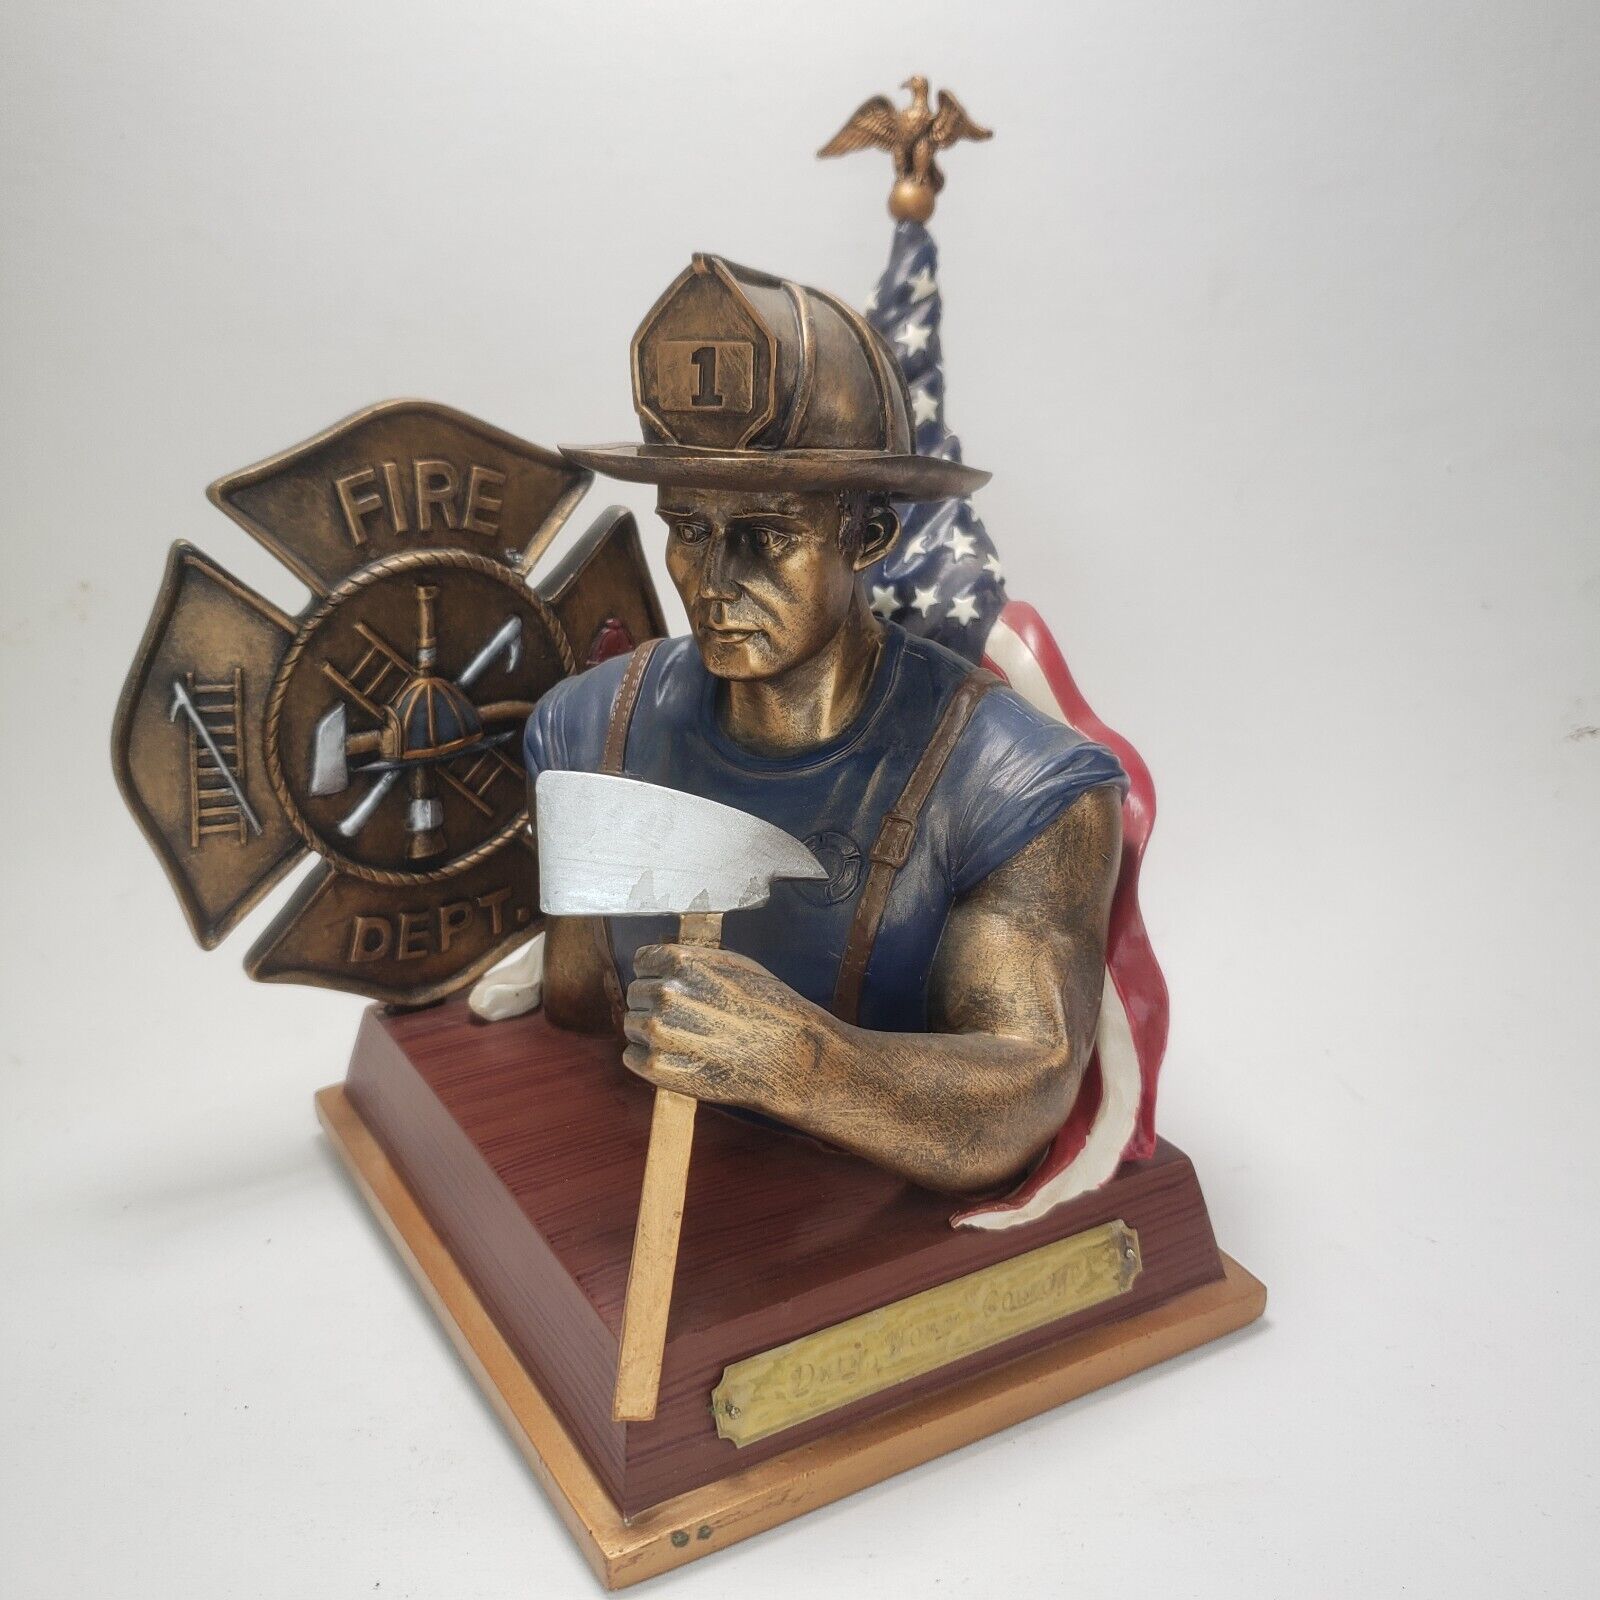 Duty, Honor, Courage; Badge of Bravery Figurine No. A3318 The Bradford Exchange